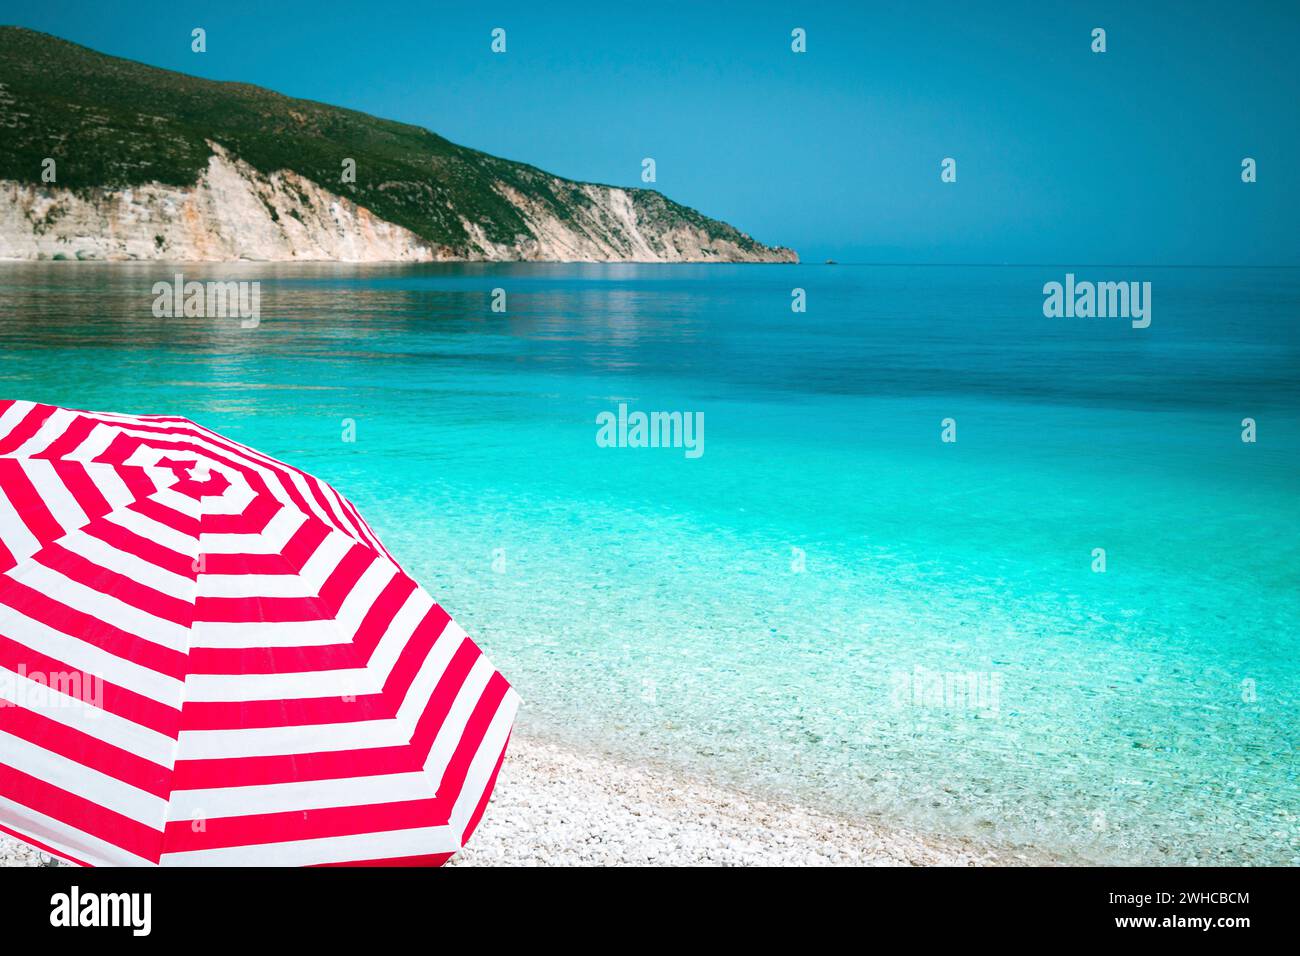 Striped red sun beach umbrella on a pebble beach with turquoise blue sea, white rocks and sky in background. Stock Photo